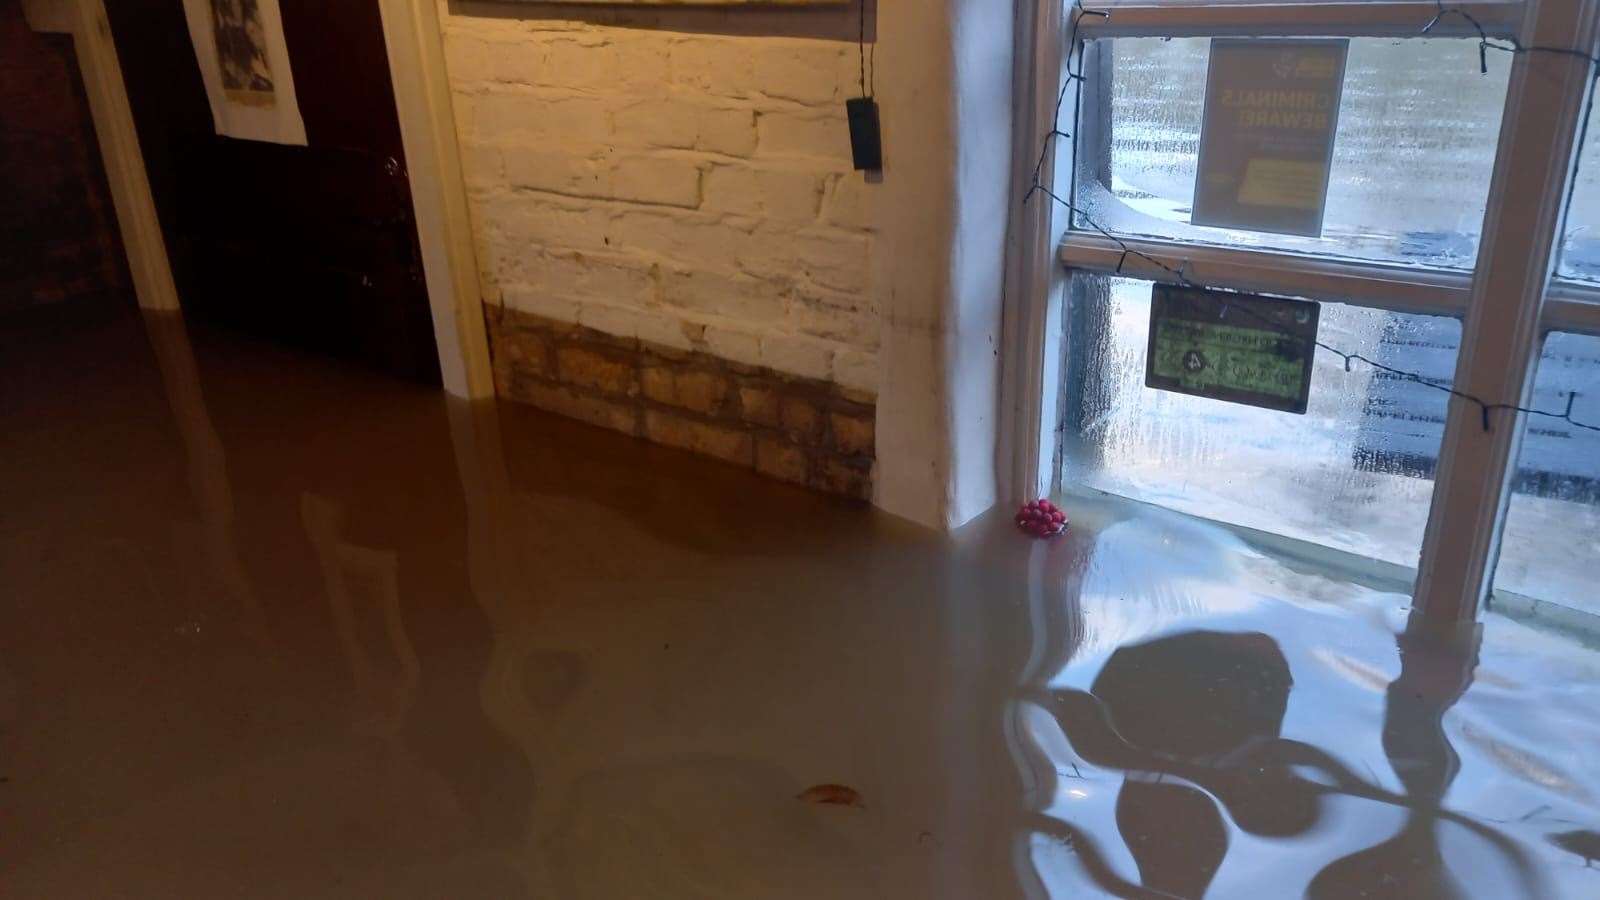 Water reached the windows inside The Boat Inn (Mario Thomas/PA)